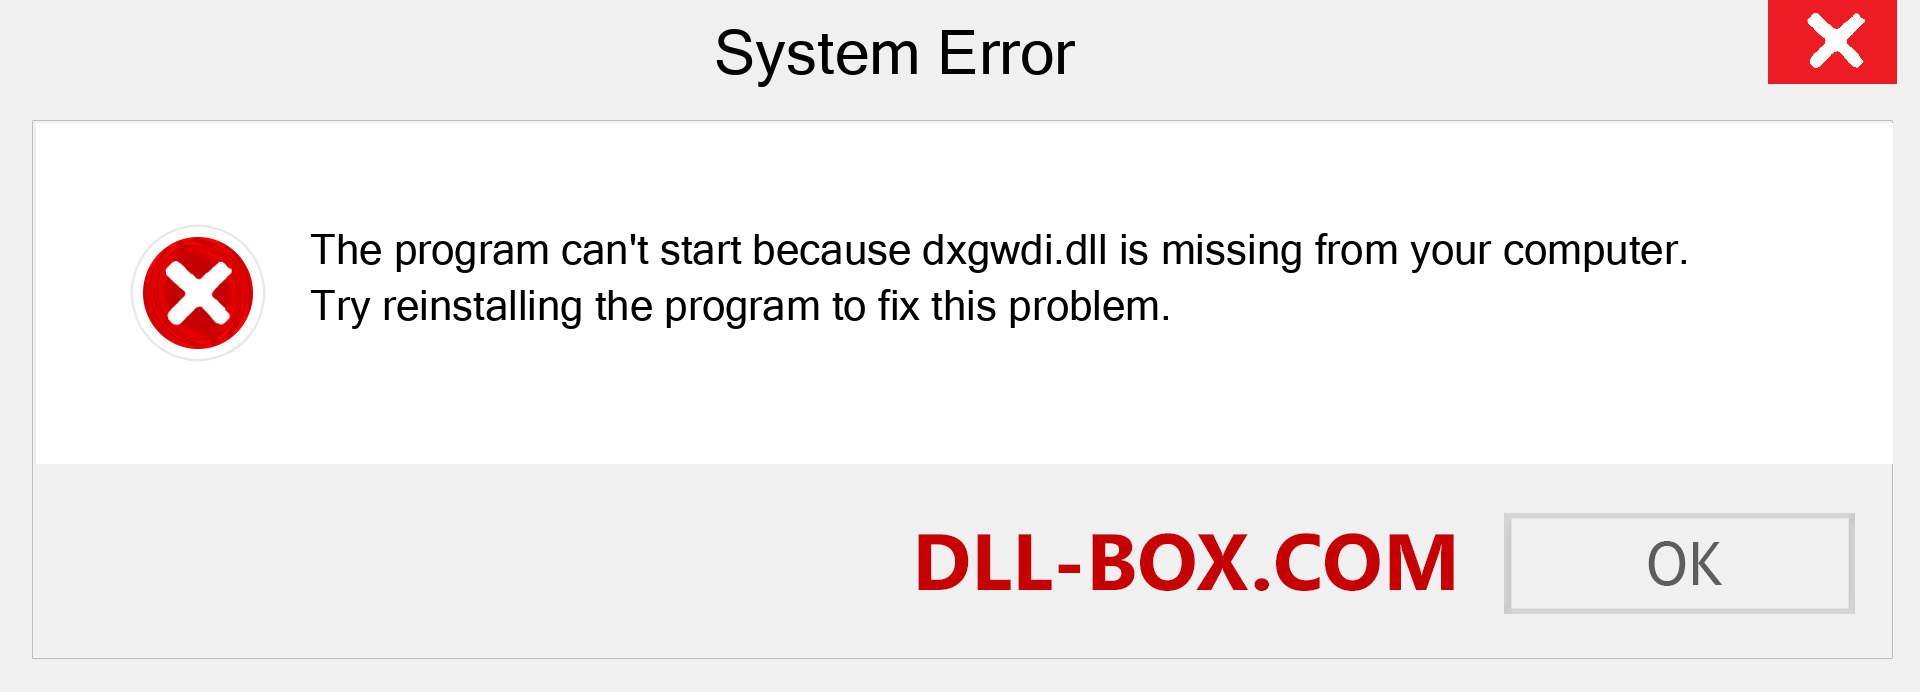  dxgwdi.dll file is missing?. Download for Windows 7, 8, 10 - Fix  dxgwdi dll Missing Error on Windows, photos, images